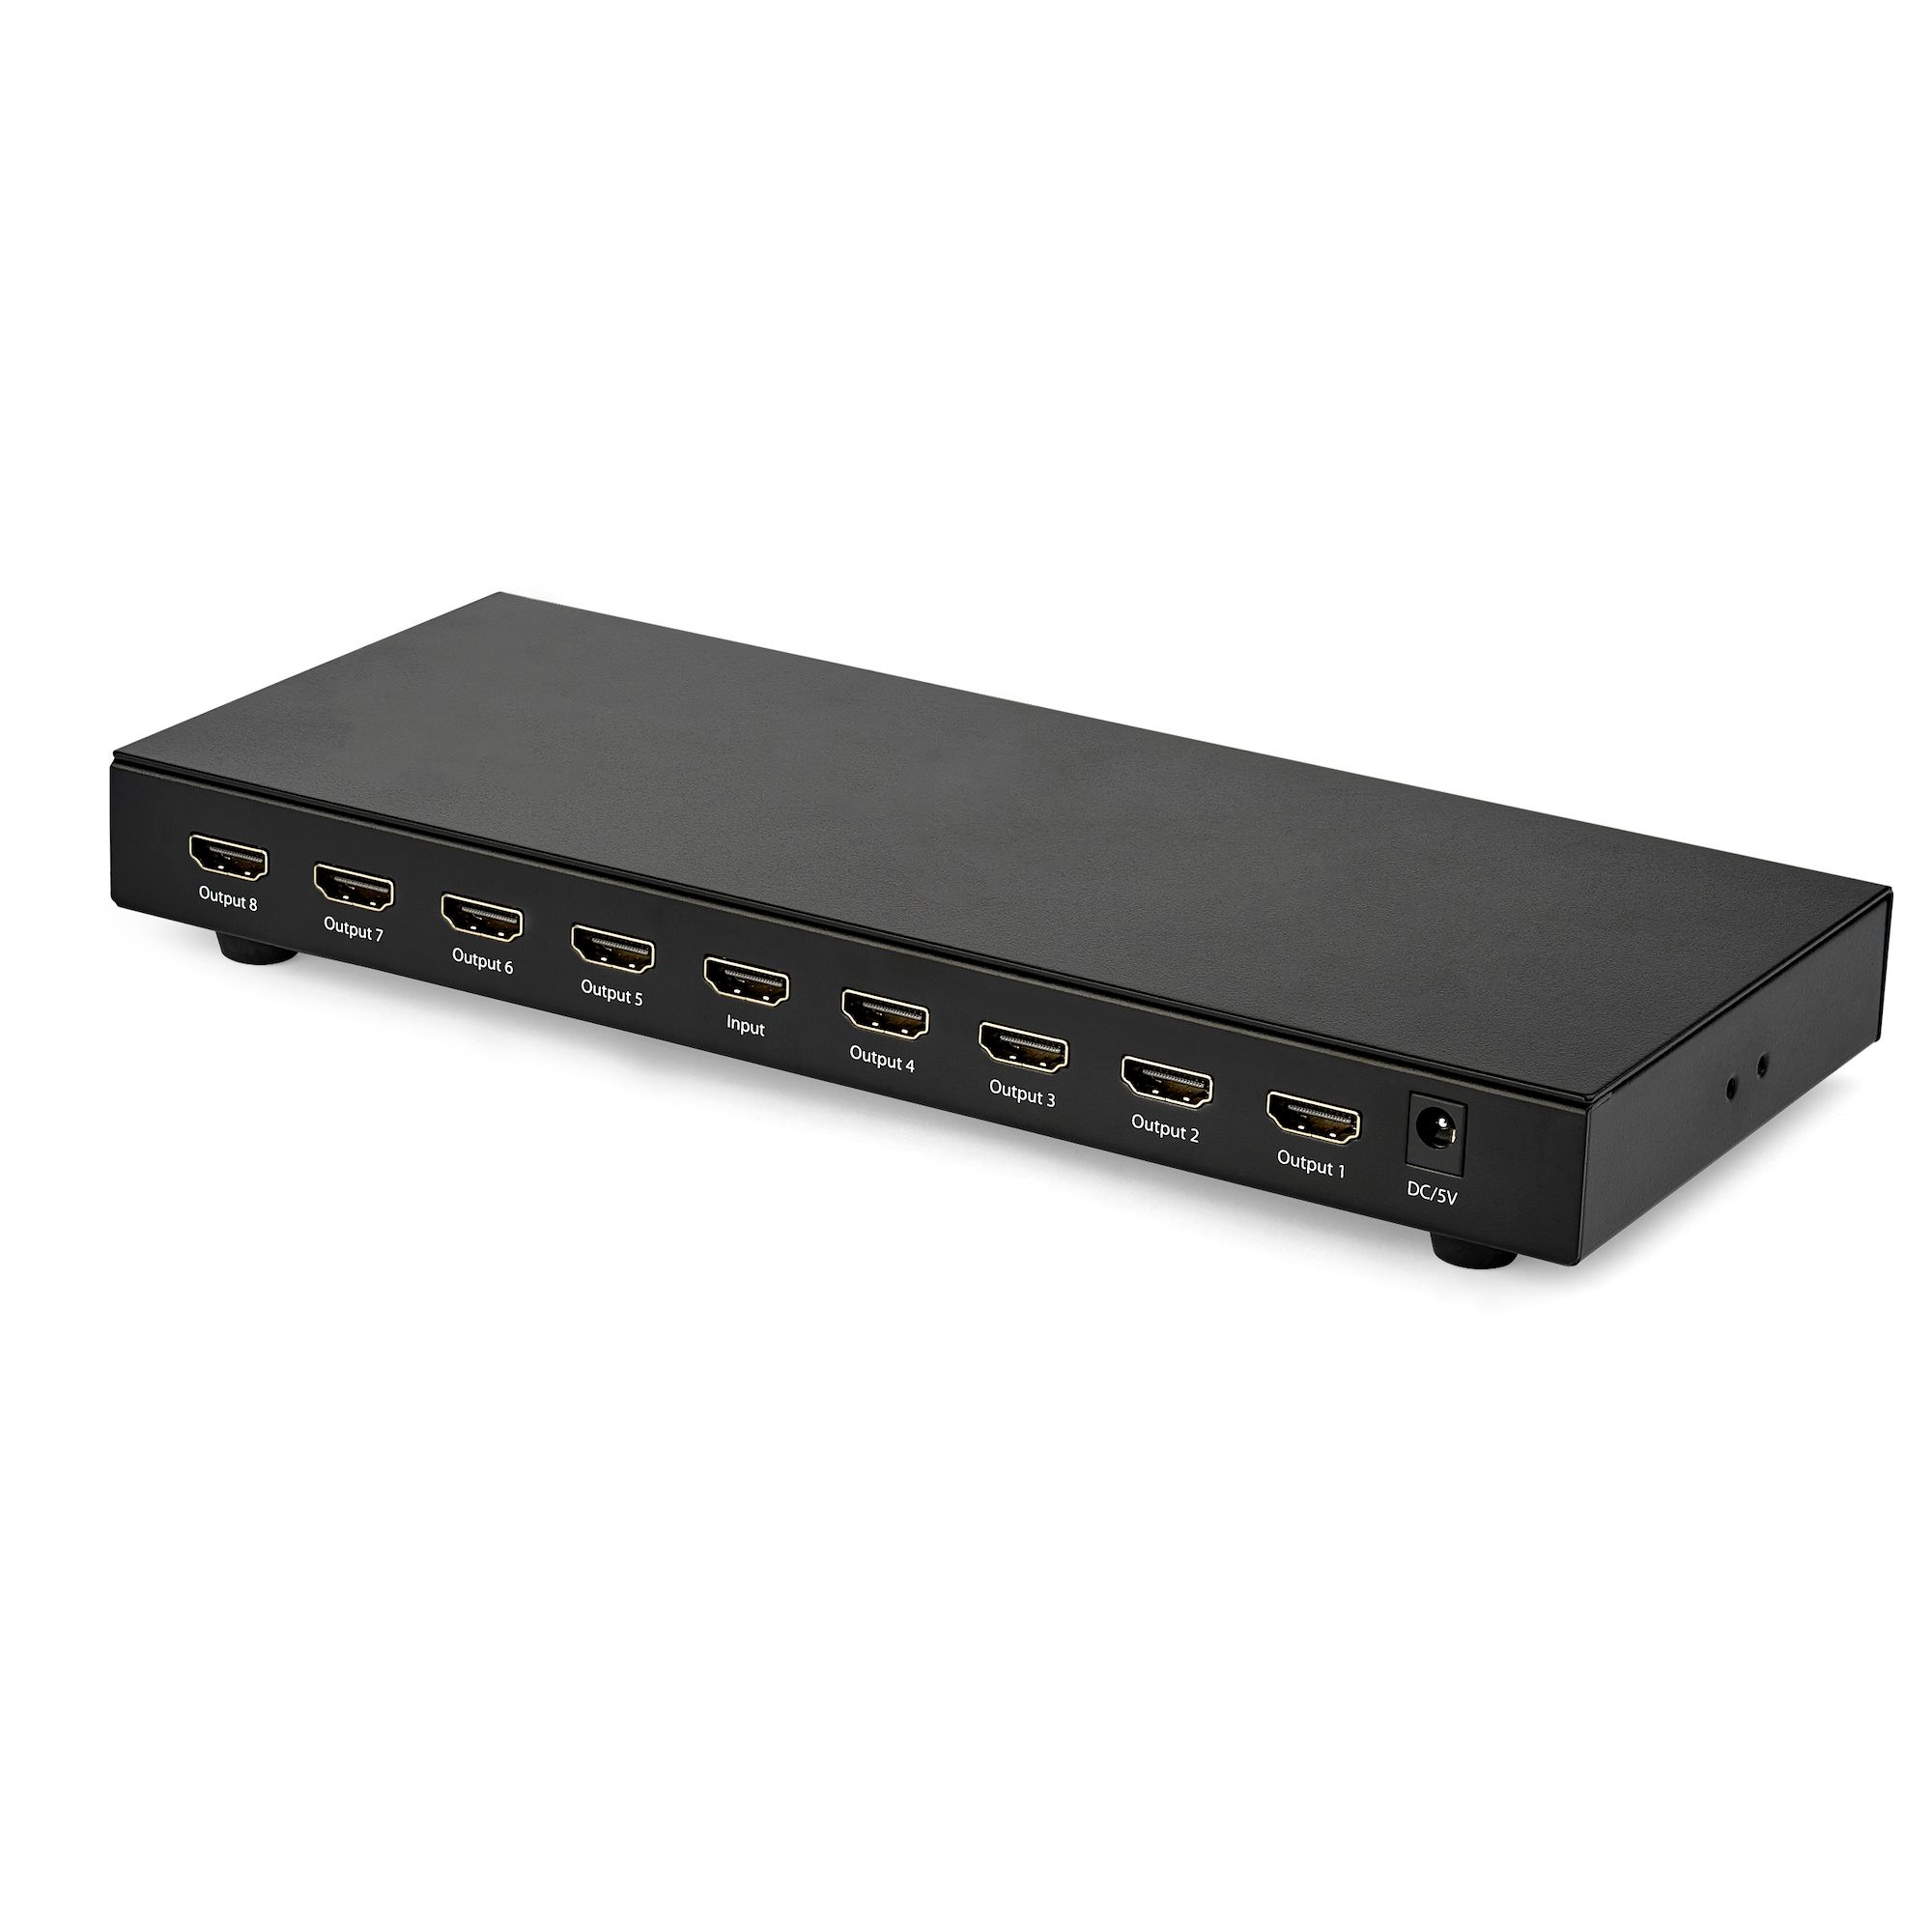 StarTech.com 4K 60Hz HDMI Splitter - HDR Support - HDMI 2.0 Splitter - 7.1 Surround Sound Audio - Easily an HDMI 4K 60Hz signal to up eight monitors with